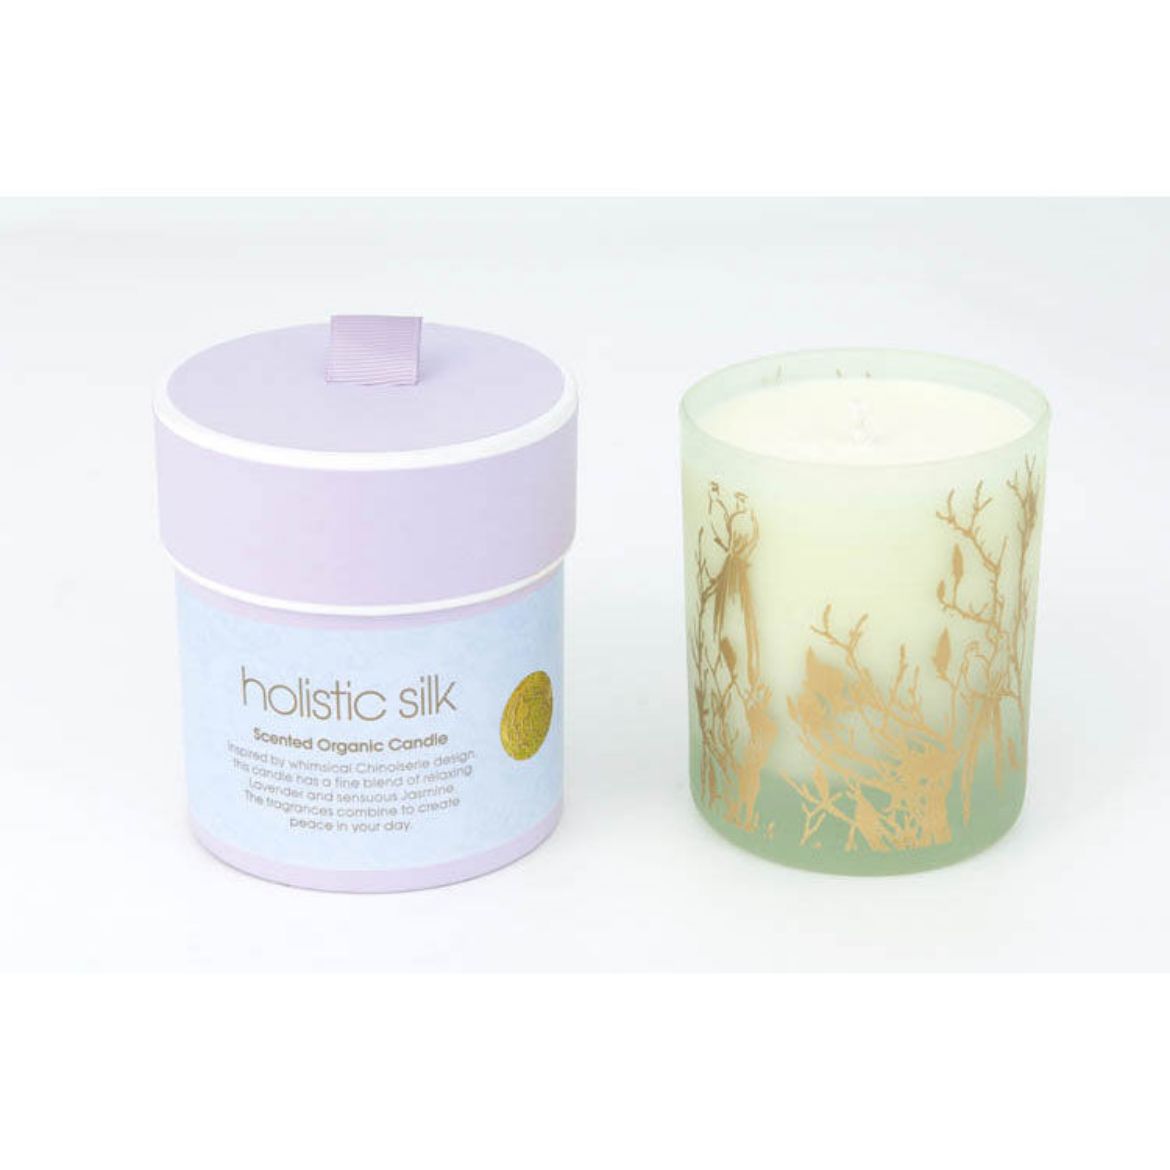 Immagine di Holistic Silk Deeply Relaxing Scented Candle